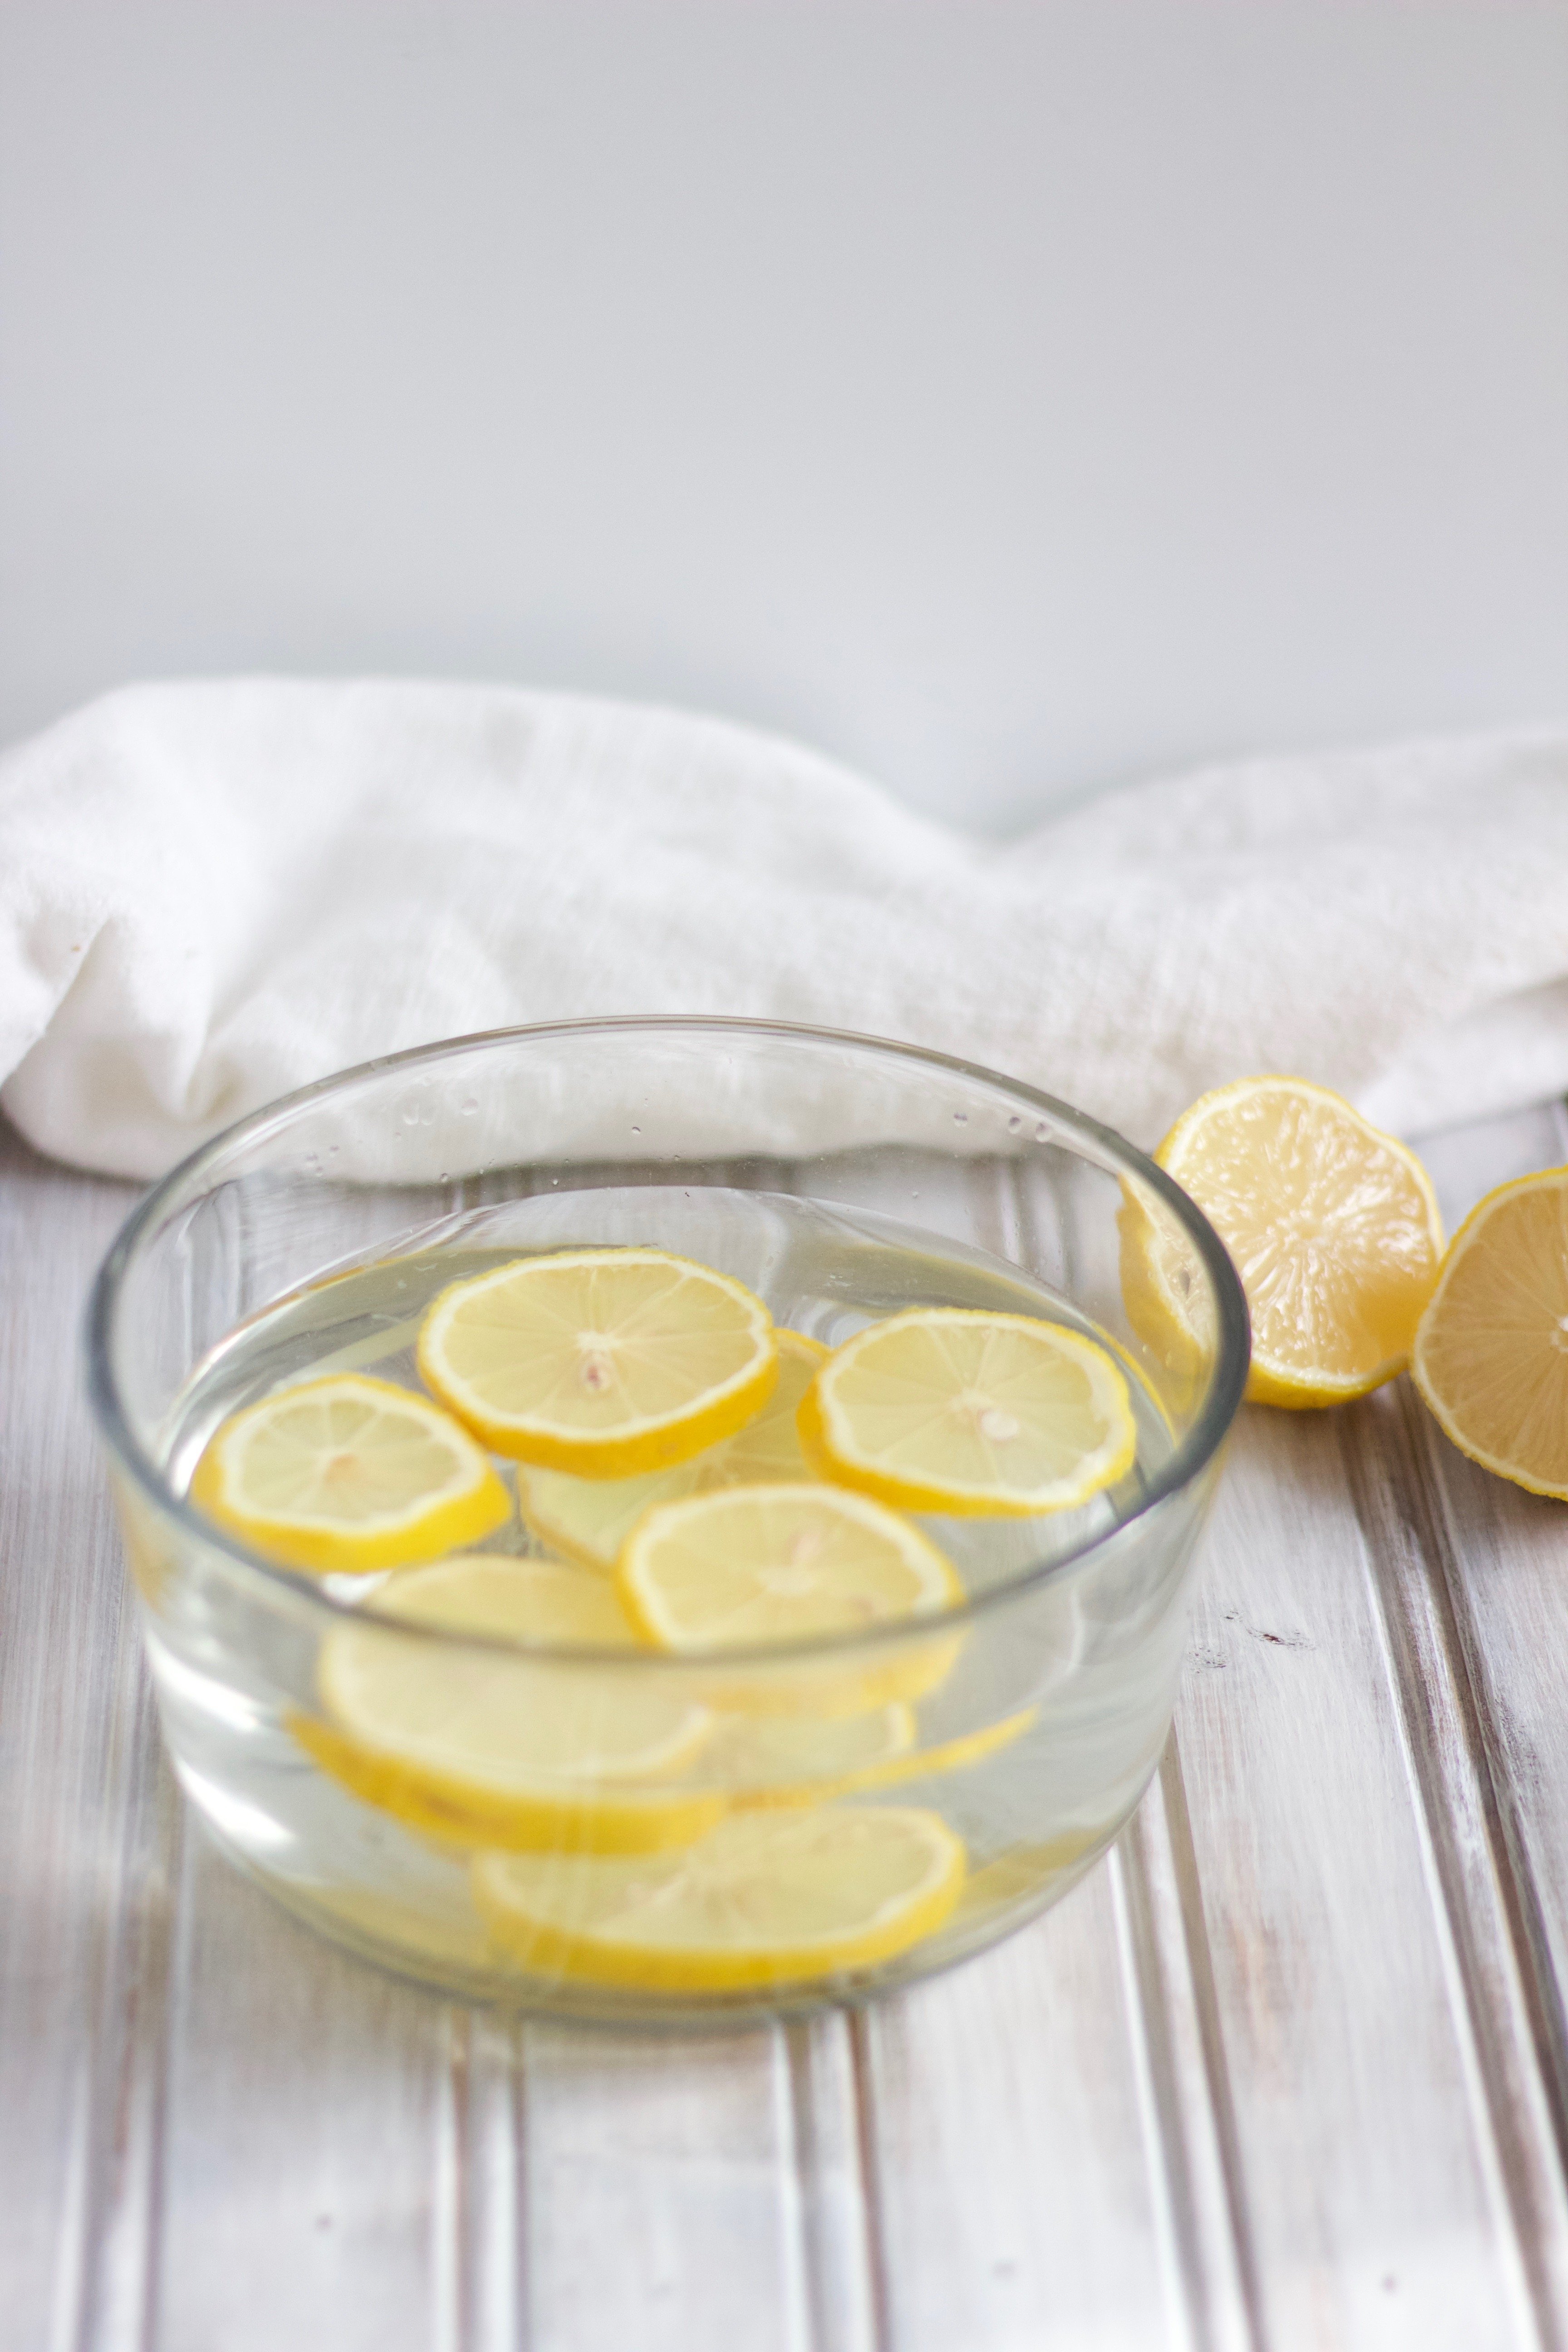 How to create an all natural lemon water cleaner to clean your microwave with NO chemicals